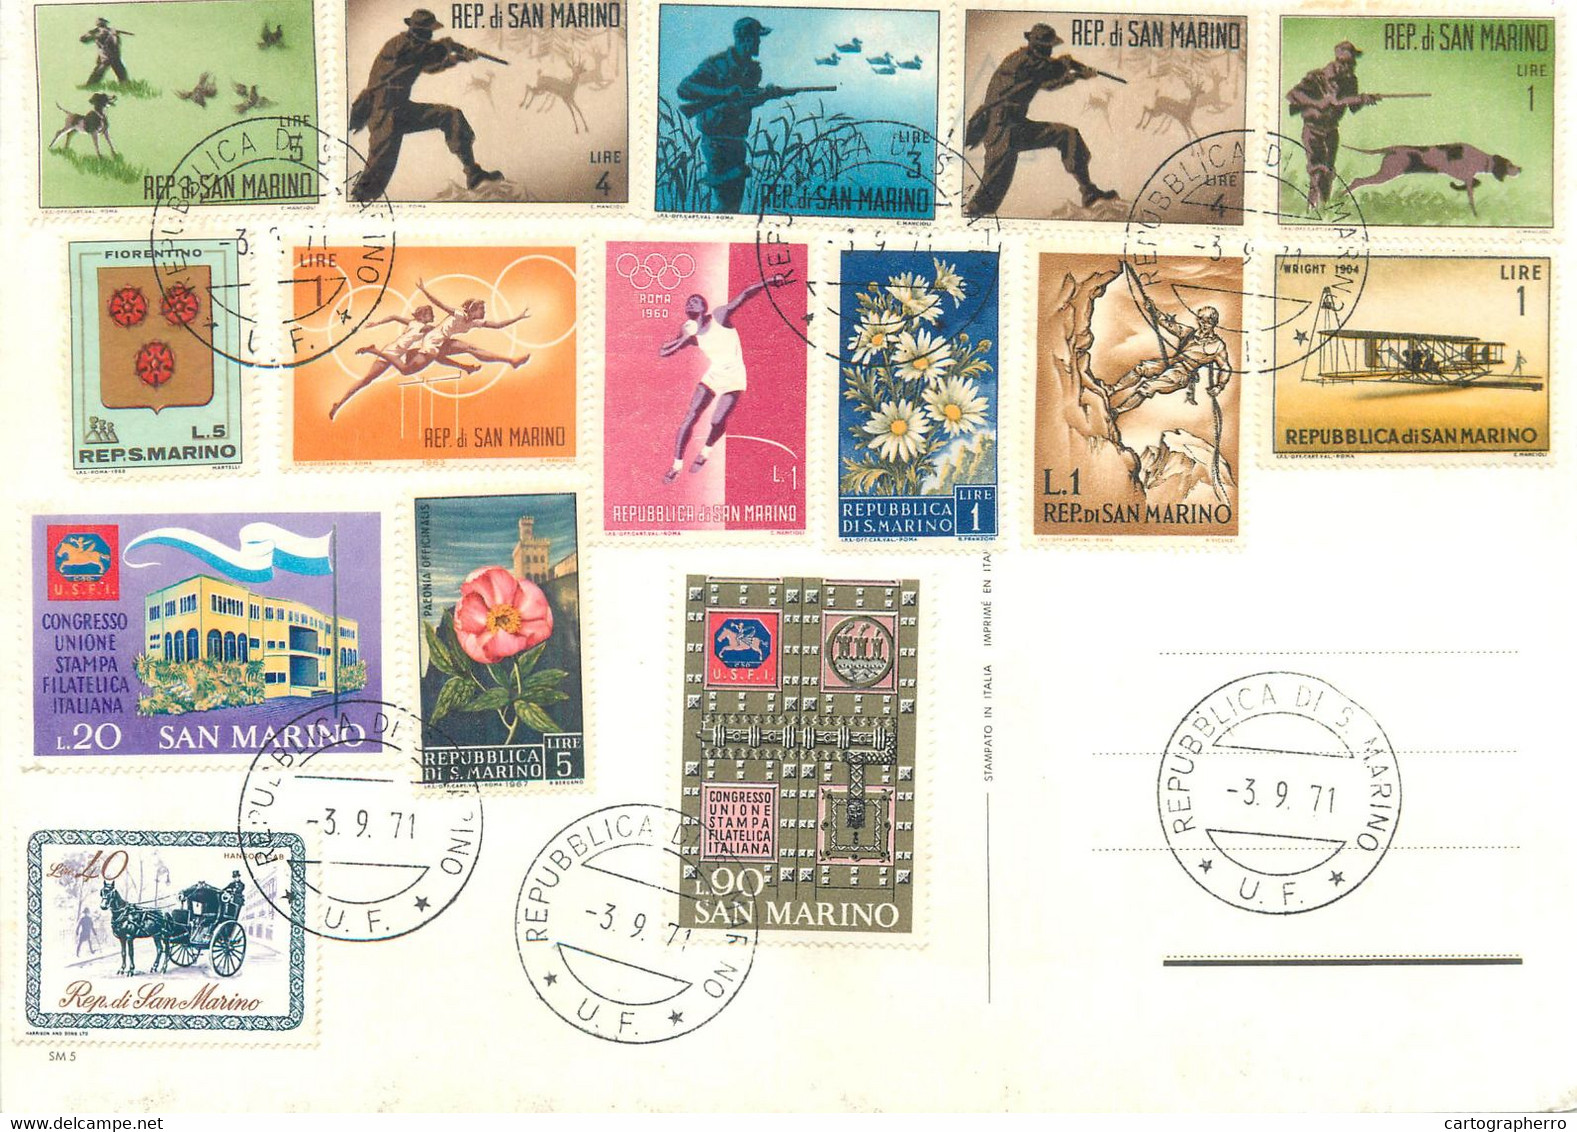 Lot 3 Extra Size Postcards SAN MARINO Atypical 13 X 19 Cm Multi Nice Franking Stamps Local Motifs Sports & Fauna Topical - Usados